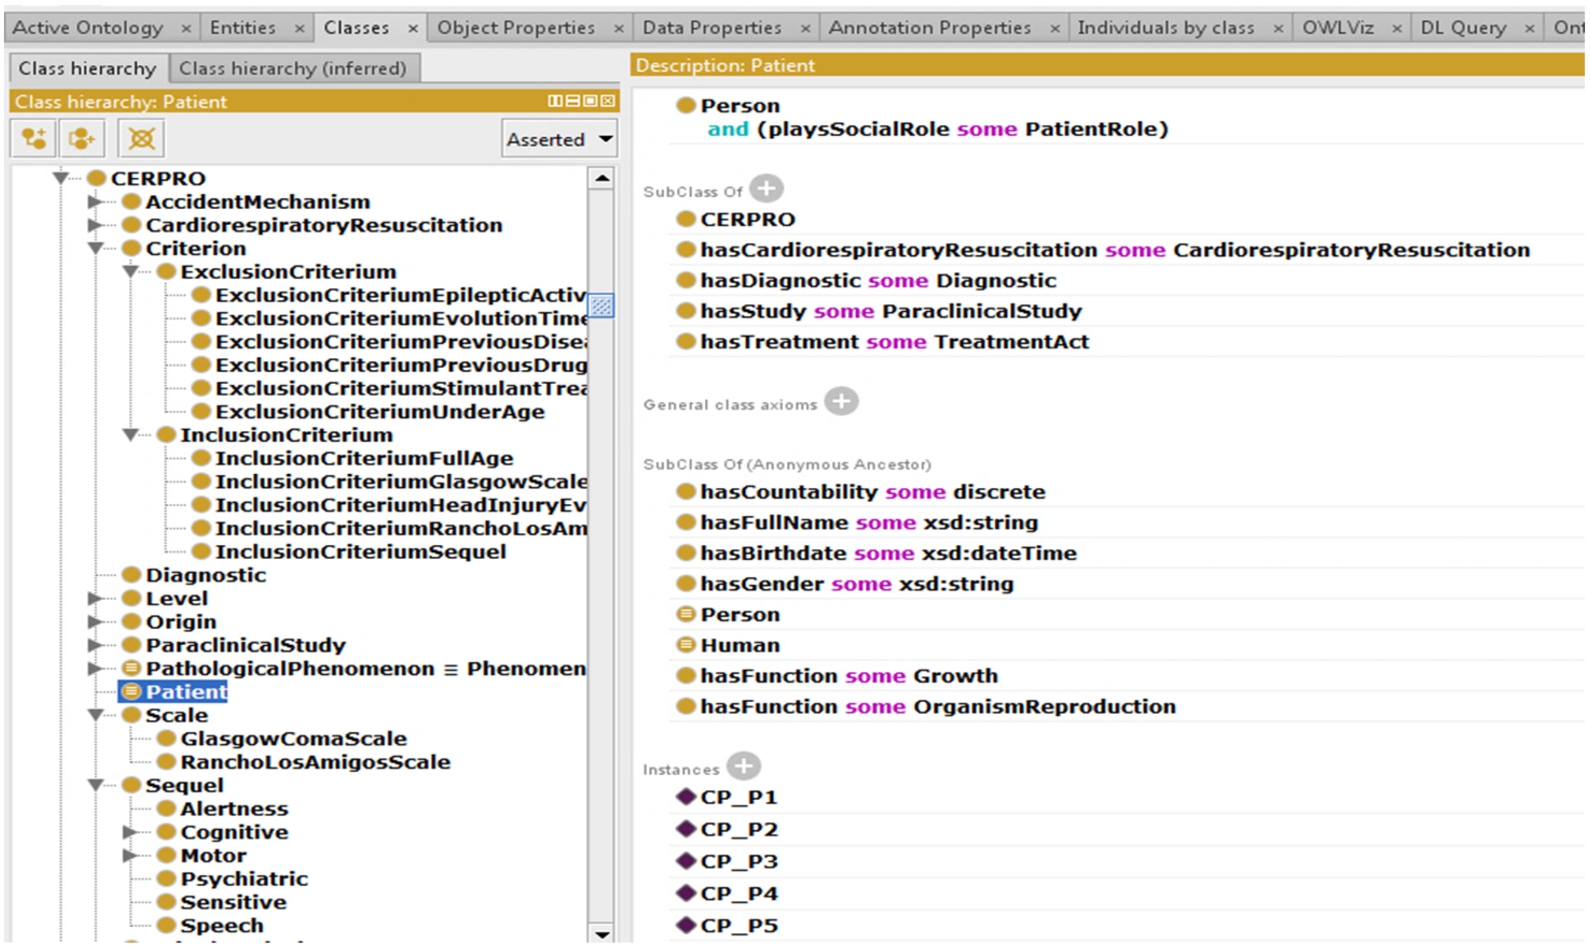 CERPRO in Protégé, displaying the OWL axioms for the patient class, and patients as instances (CP_P1, CP_P2, etc.).